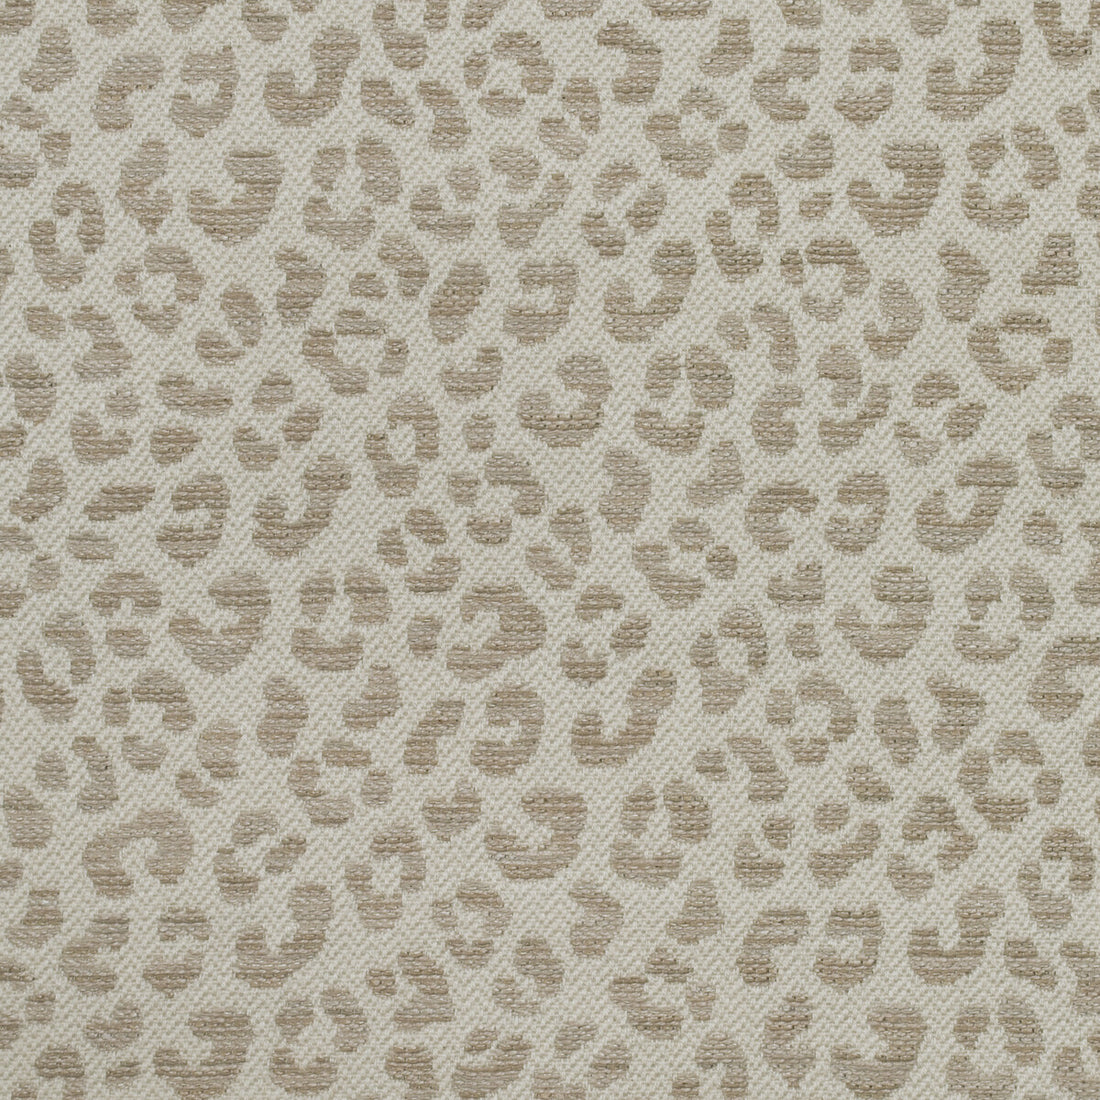 Wildcat fabric in stone color - pattern AM100400.106.0 - by Kravet Couture in the Andrew Martin Woodland By Sophie Paterson collection